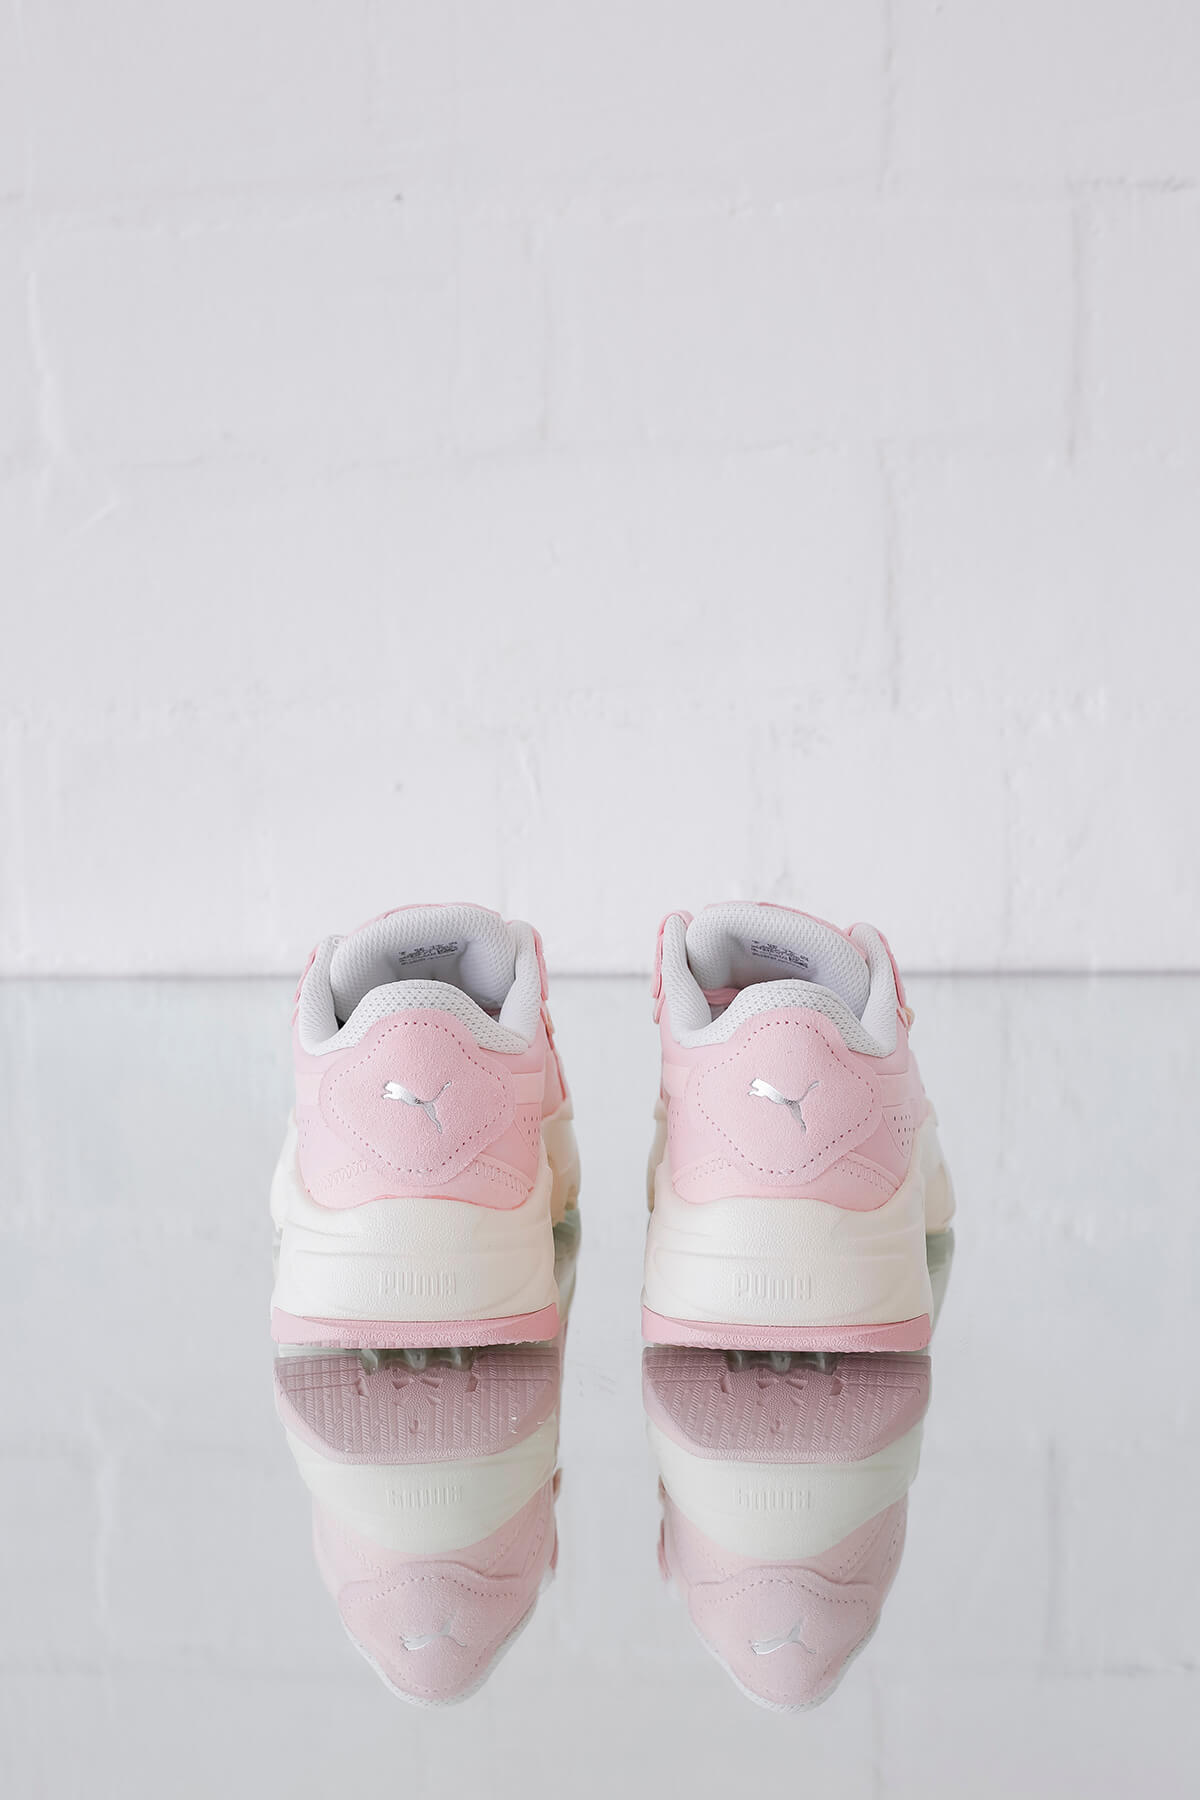 Puma Orkid Soft Chalk Pink-Marshmallow – wasted hour - concept store